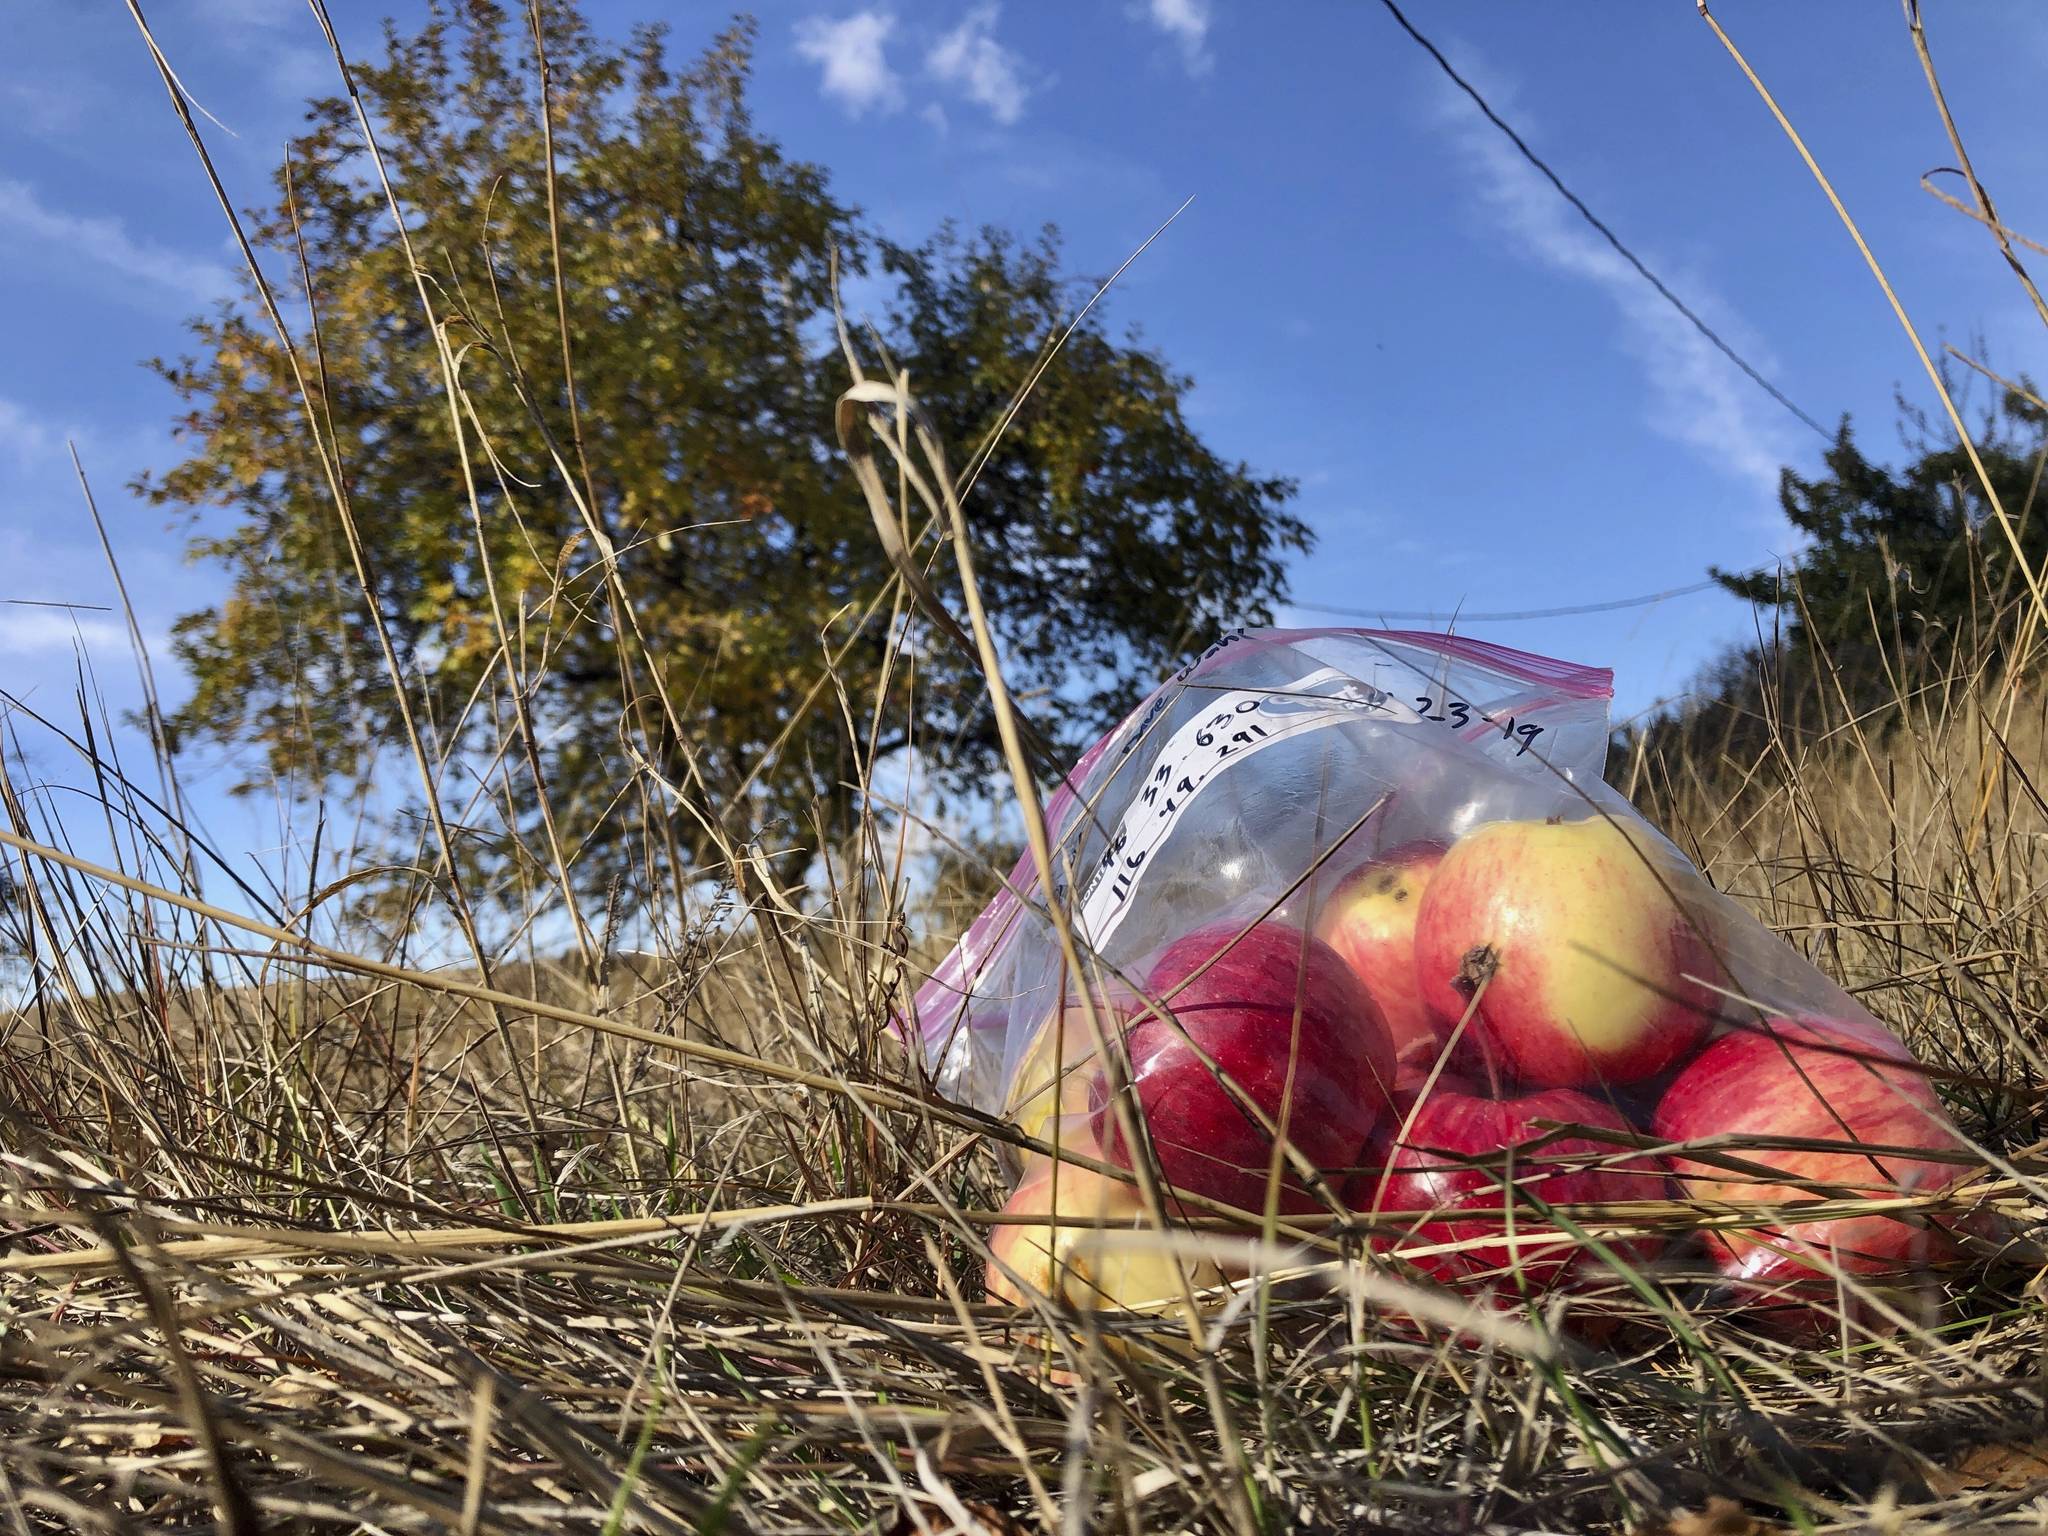 In this Oct. 23, 2019, photo, apples collected by amateur botanists David Benscoter and EJ Brandt of the Lost Apple Project, rest on the ground in an orchard at an abandoned homestead near Genesee, Idaho. Benscoter and Brandt recently learned that their work in the fall of 2019 has led to the rediscovery of 10 apple varieties in the Pacific Northwest that were planted by long-ago pioneers and had been thought extinct. (AP Photo/Gillian Flaccus)